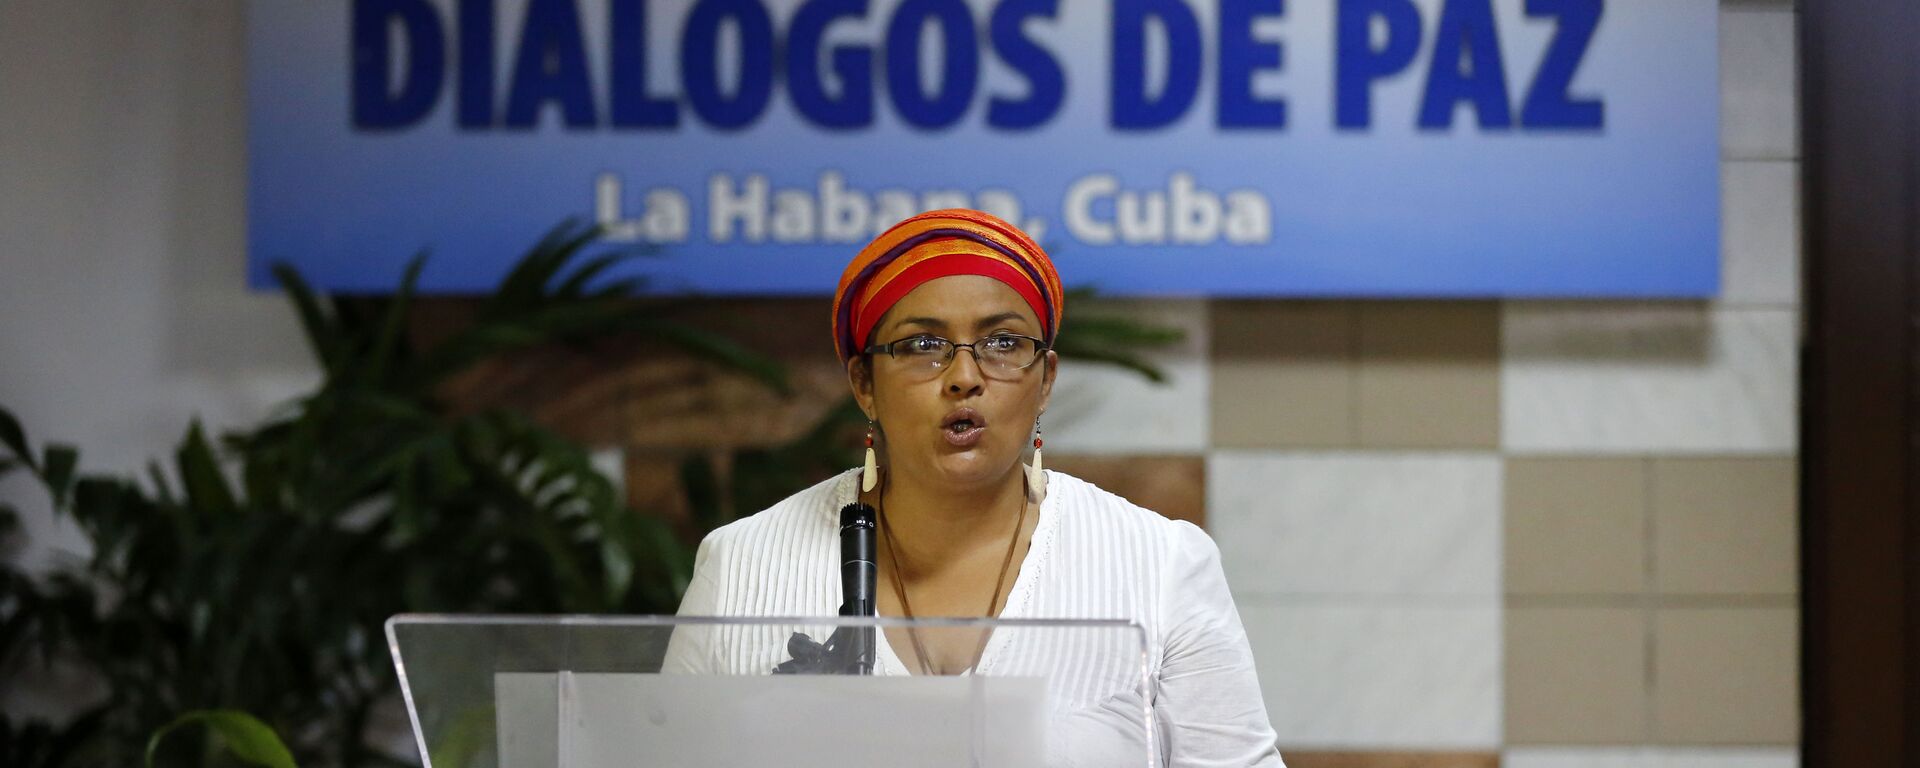 Victoria Sandino, member of the Revolutionary Armed Forces of Colombia, FARC, reads a statement before the start of a new round of peace talks between the FARC rebels and the government of Colombia, in Havana, Cuba, Thursday, May 21, 2015 - Sputnik Mundo, 1920, 12.08.2021